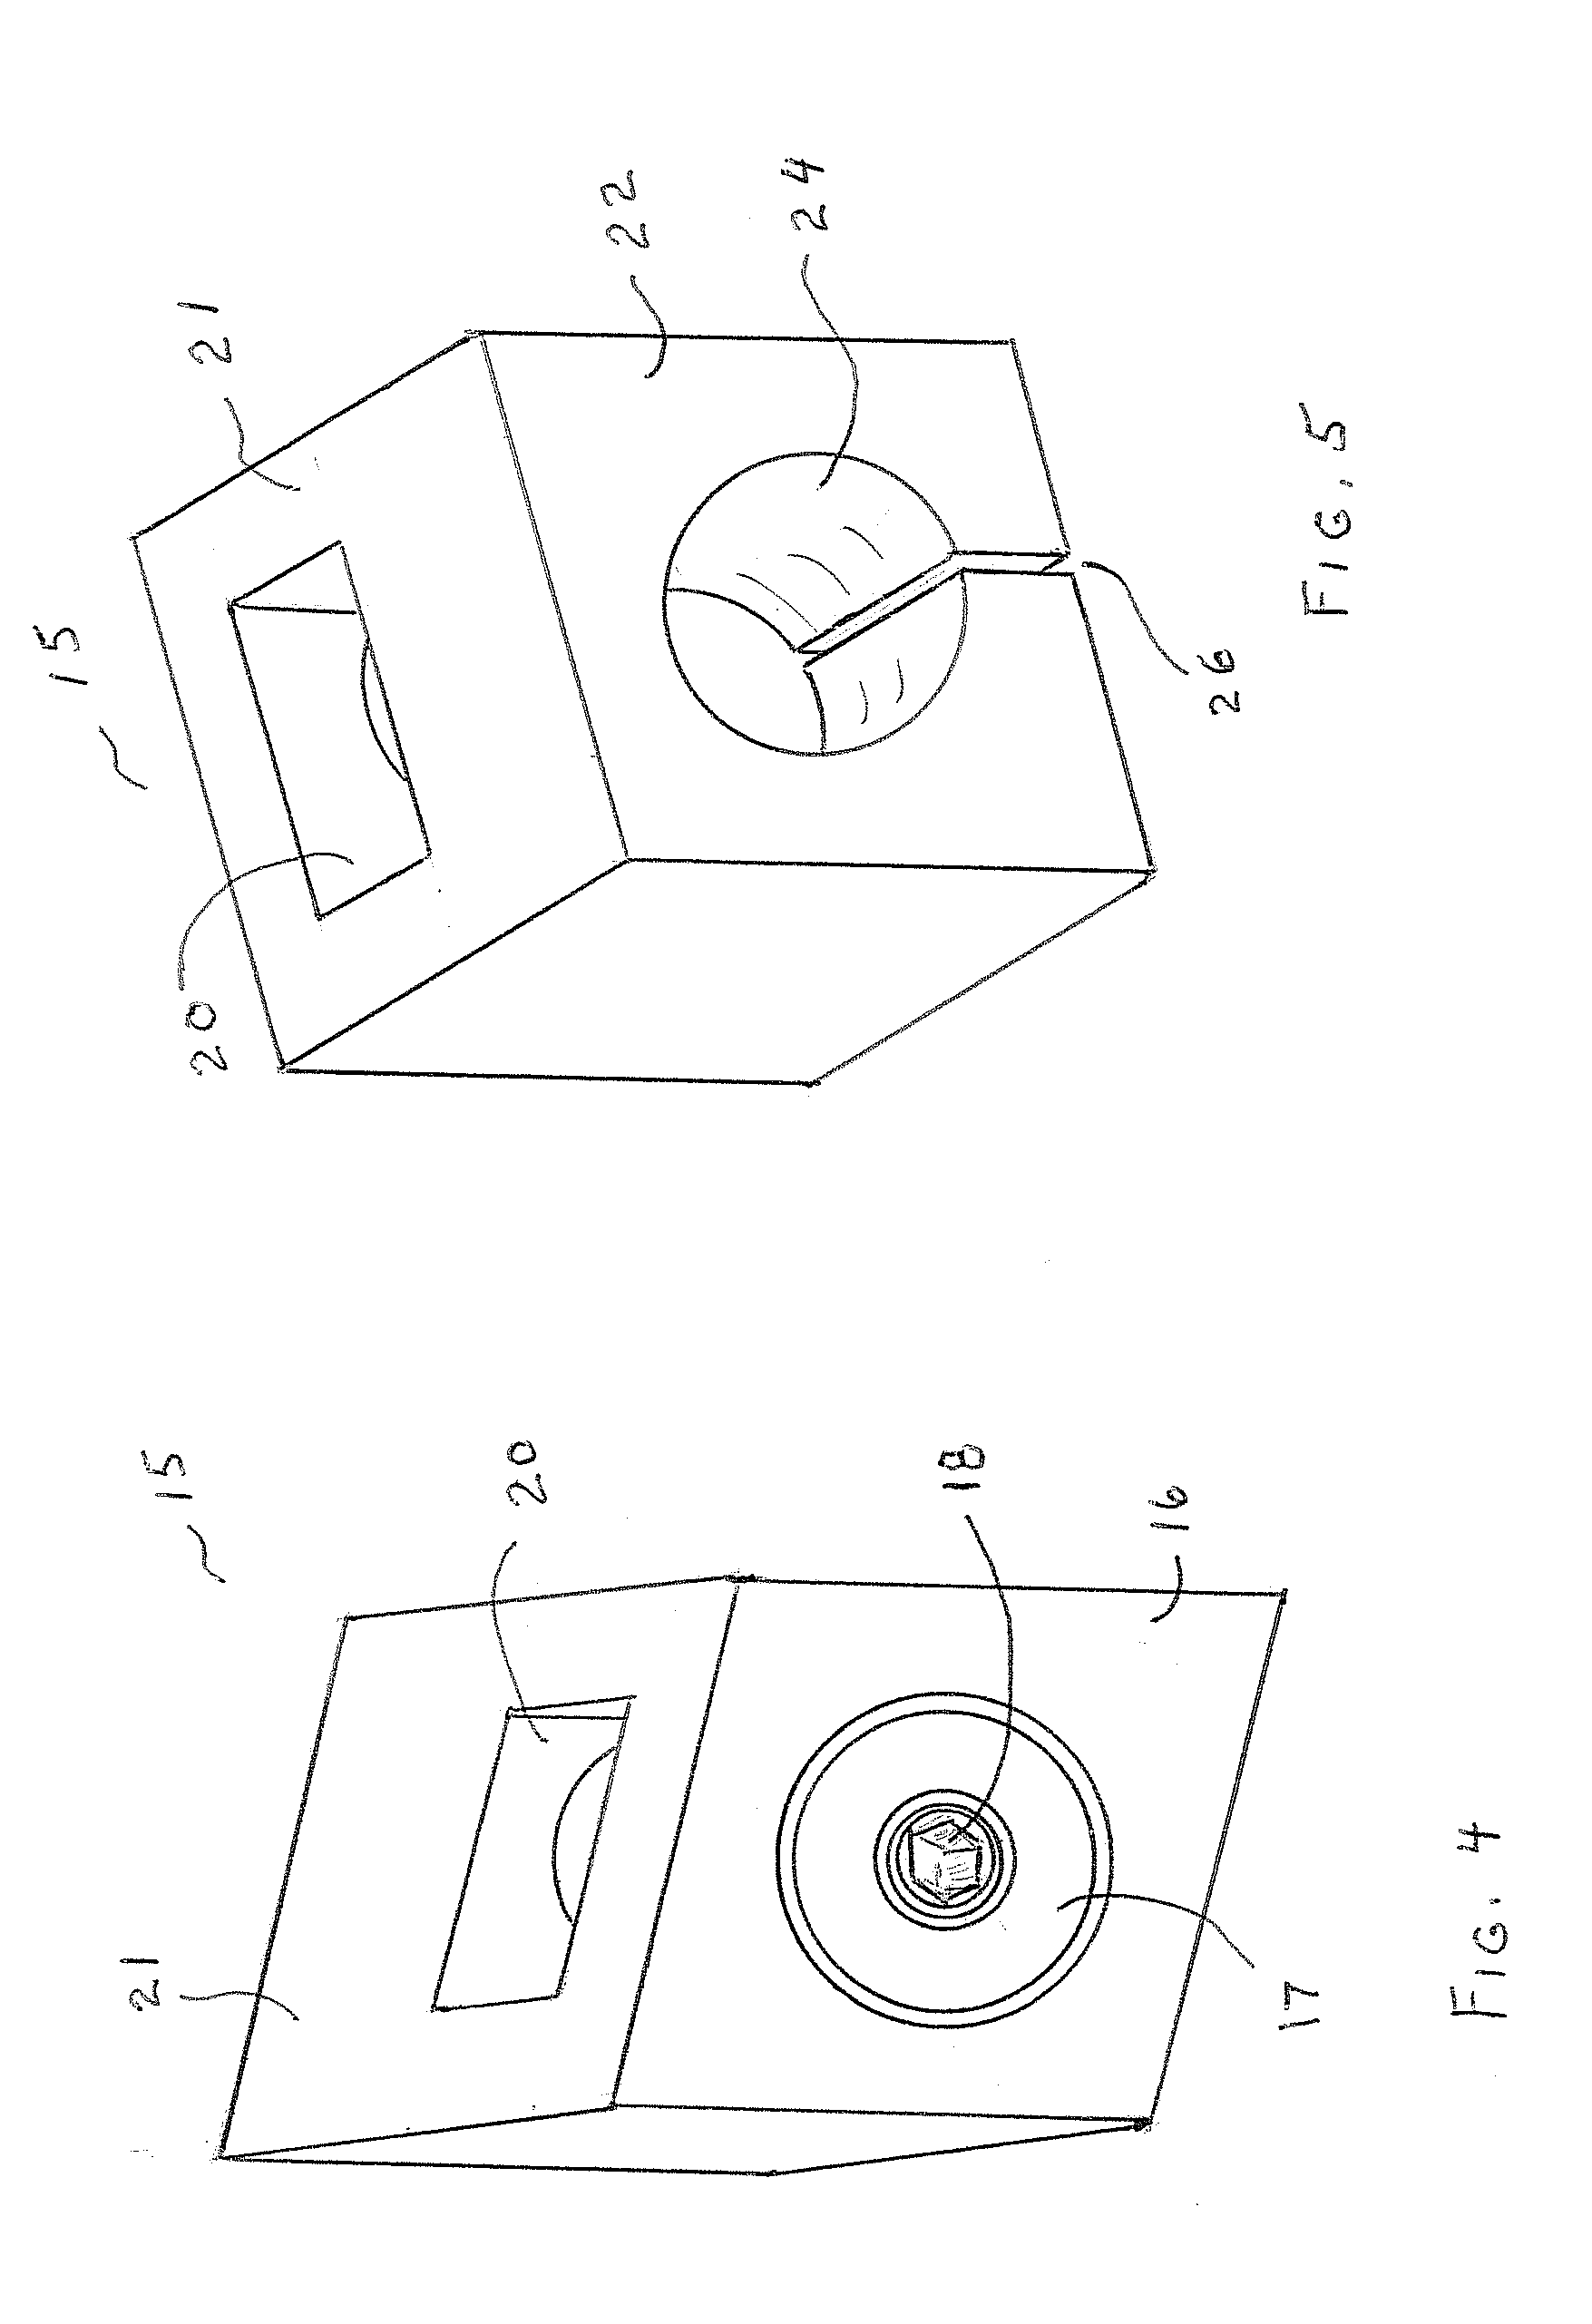 Method and apparatus for orthopedic cast removal utilizing a rotary impact driver